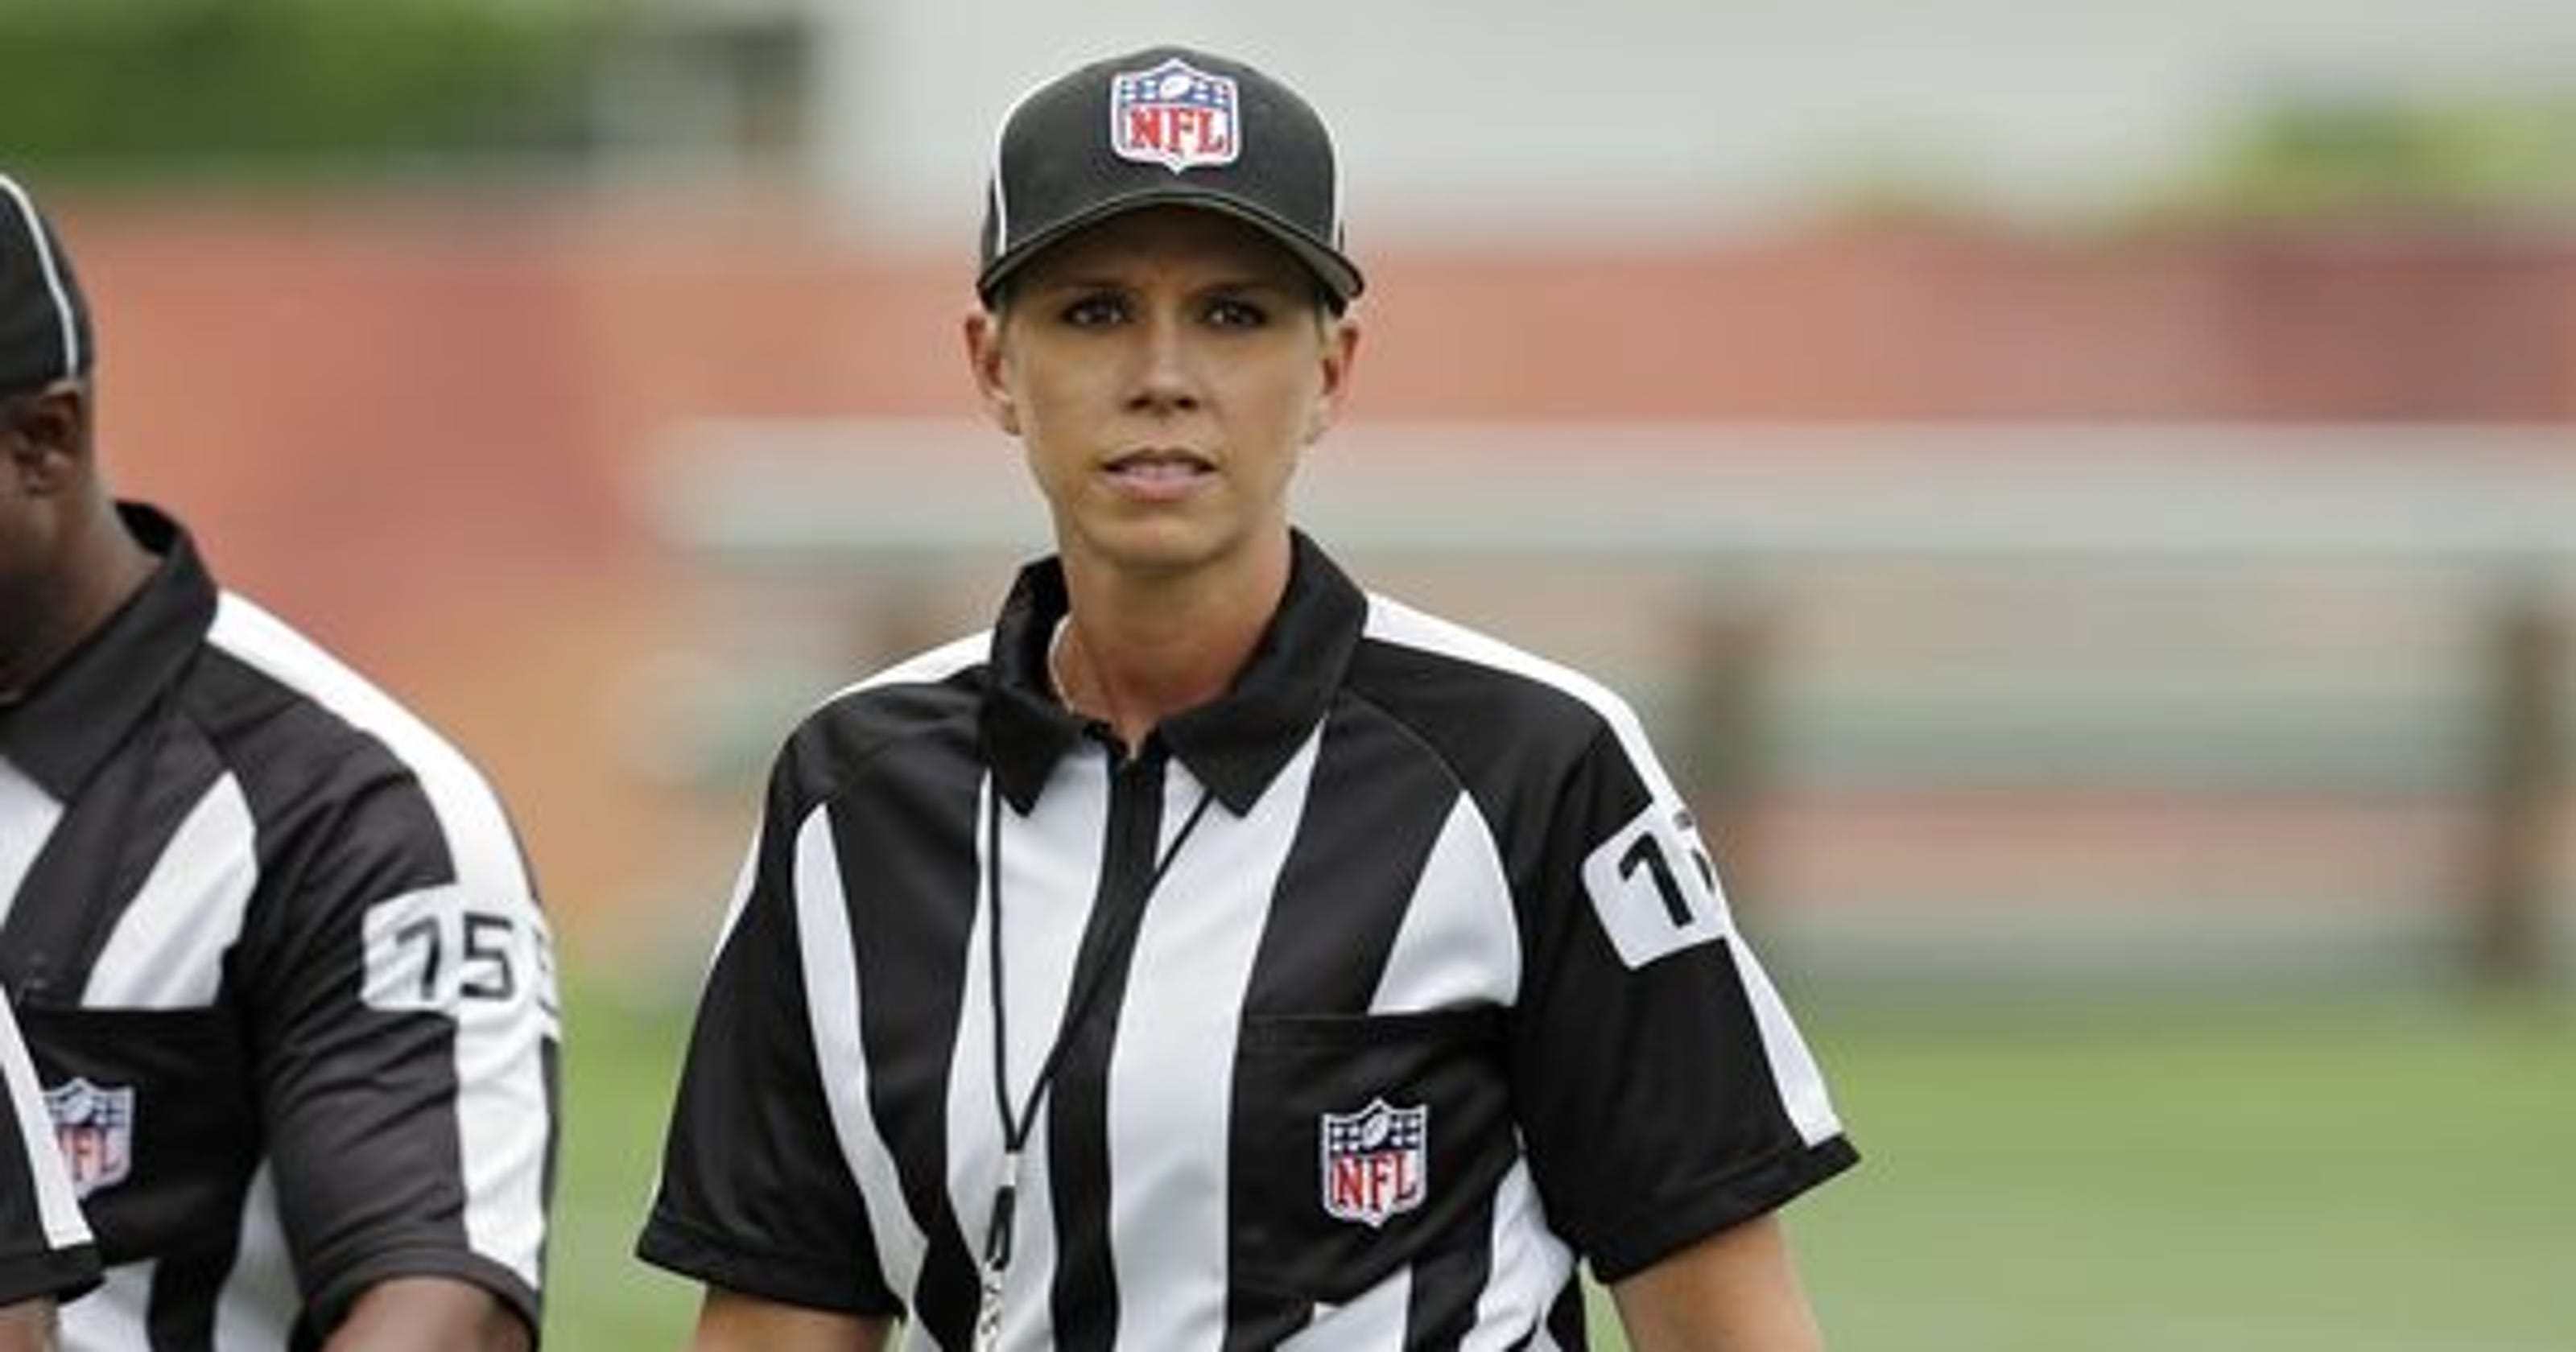 NFL hires Sarah Thomas, its first female official